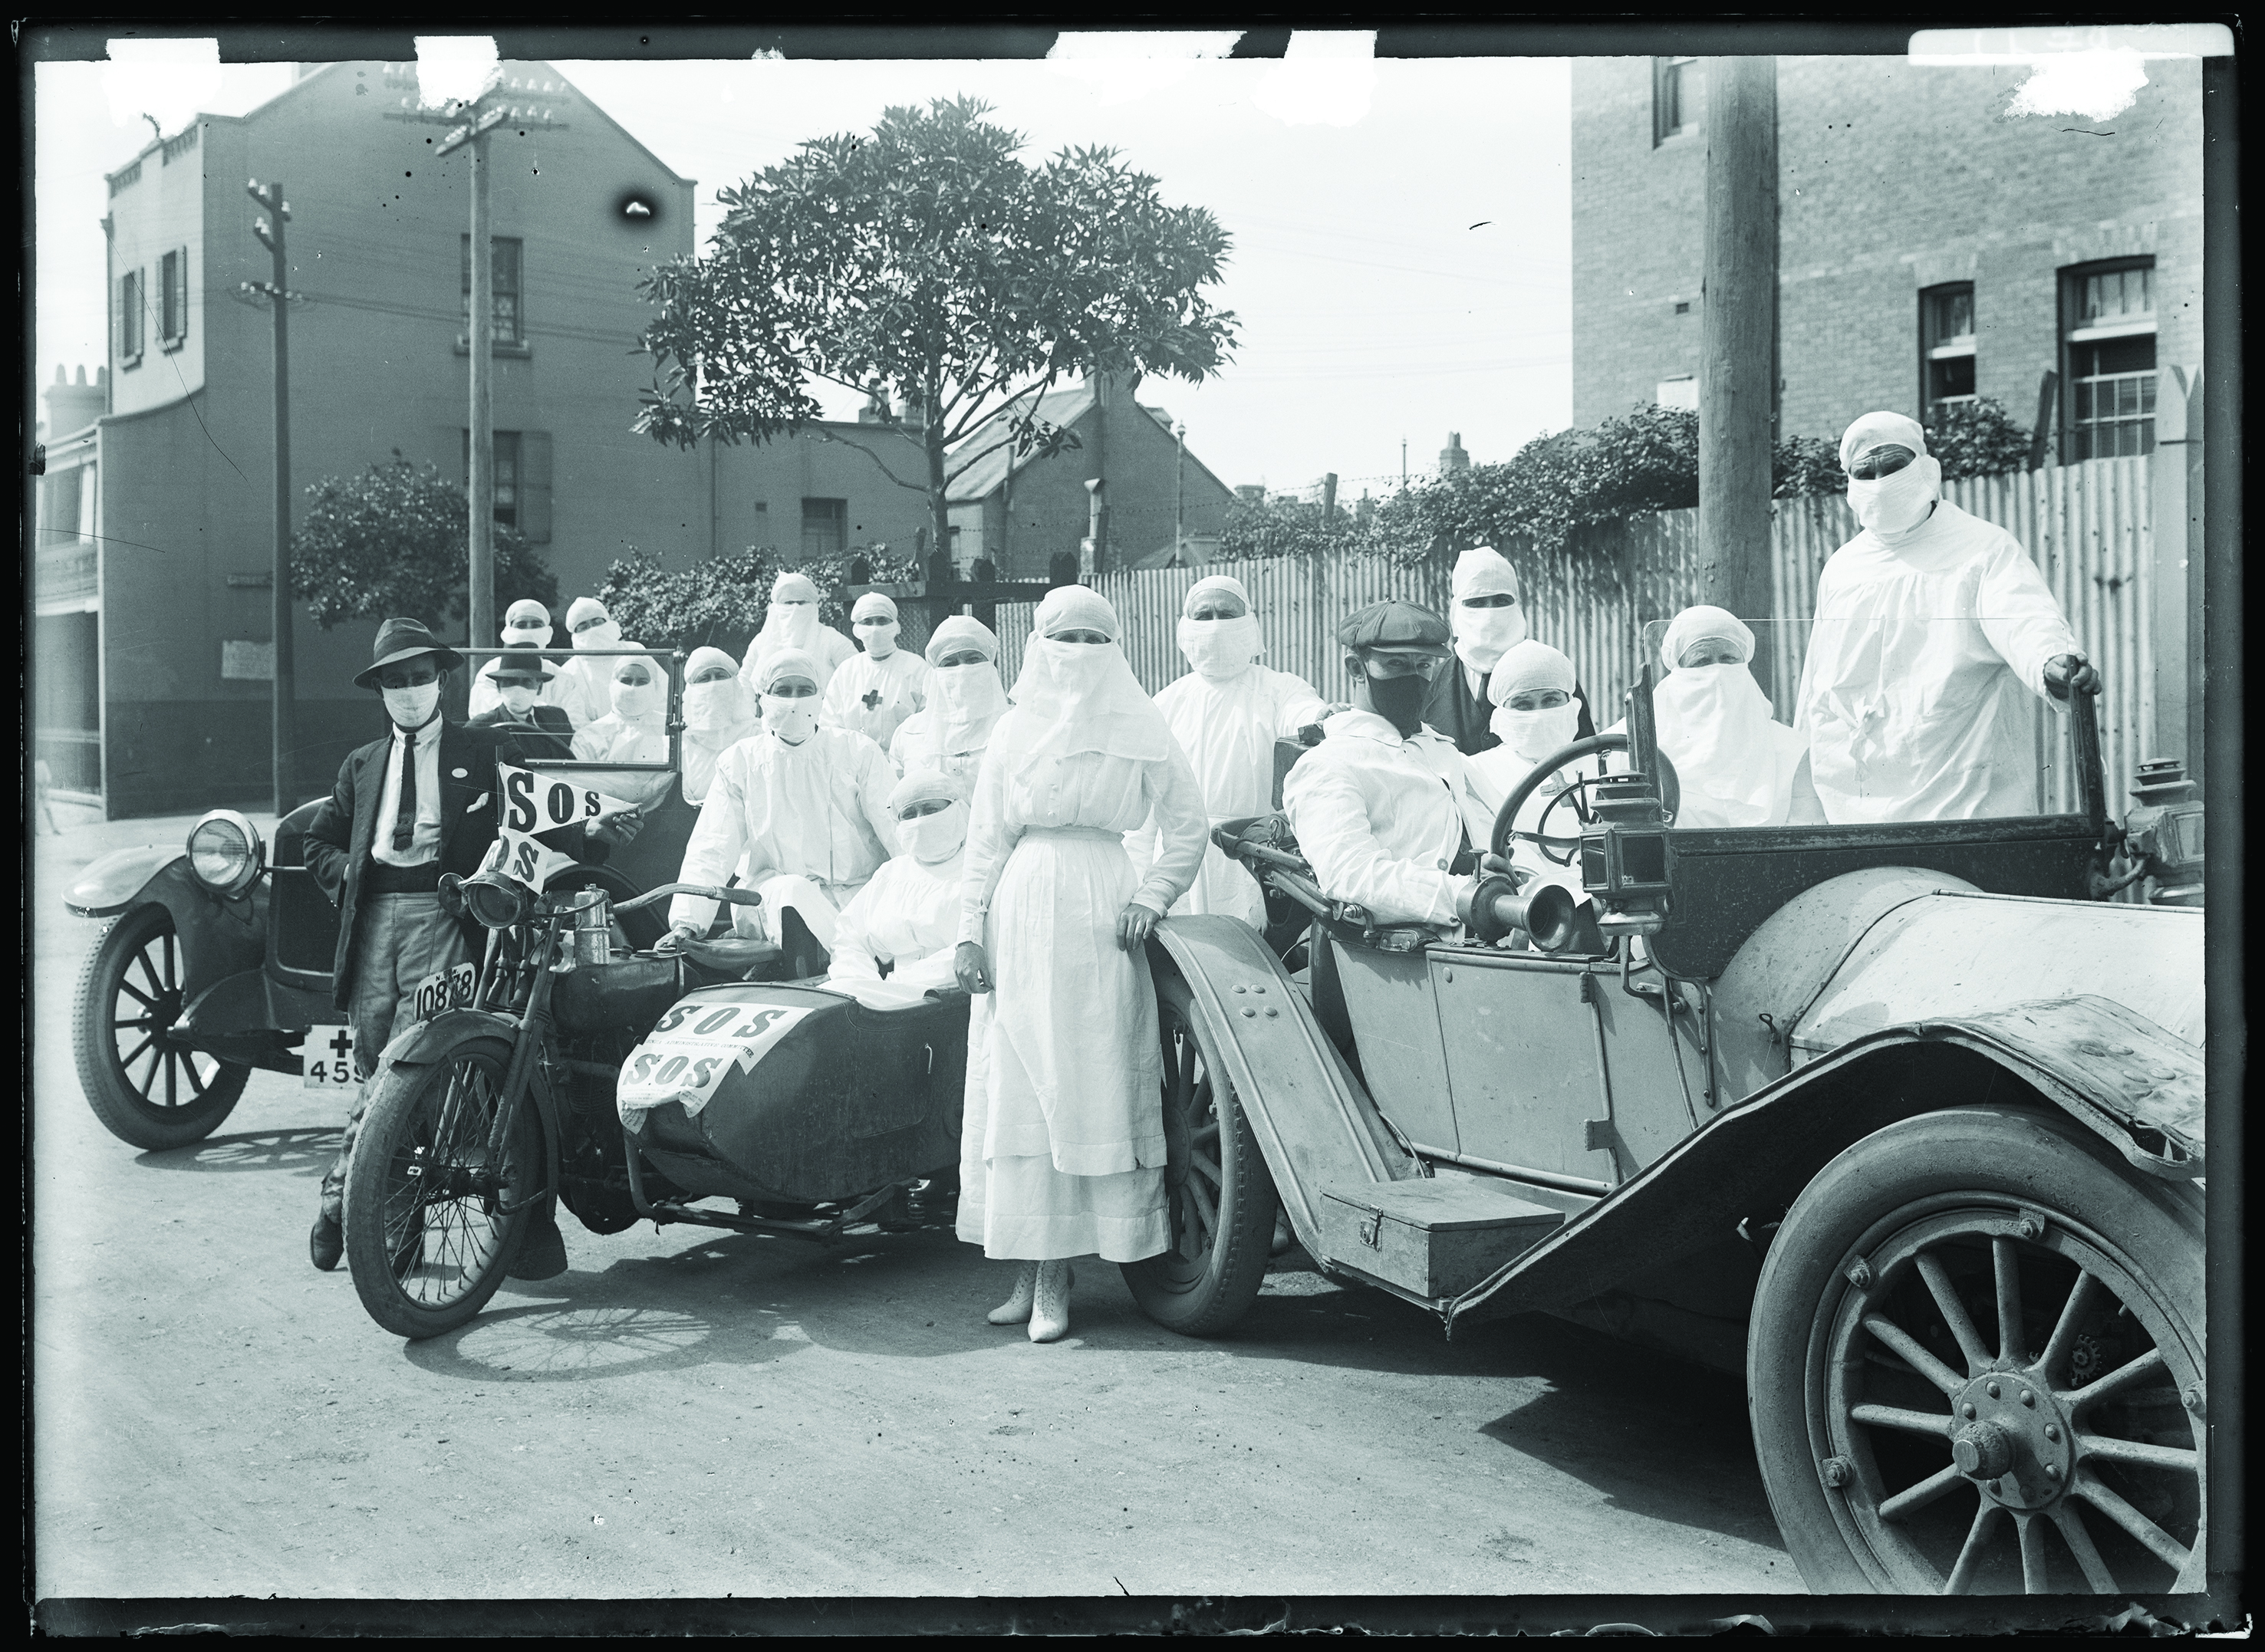 A group of nurses and doctors dressed in surgical whites and masks about to get on motorbikes and cars to tend influenza patients